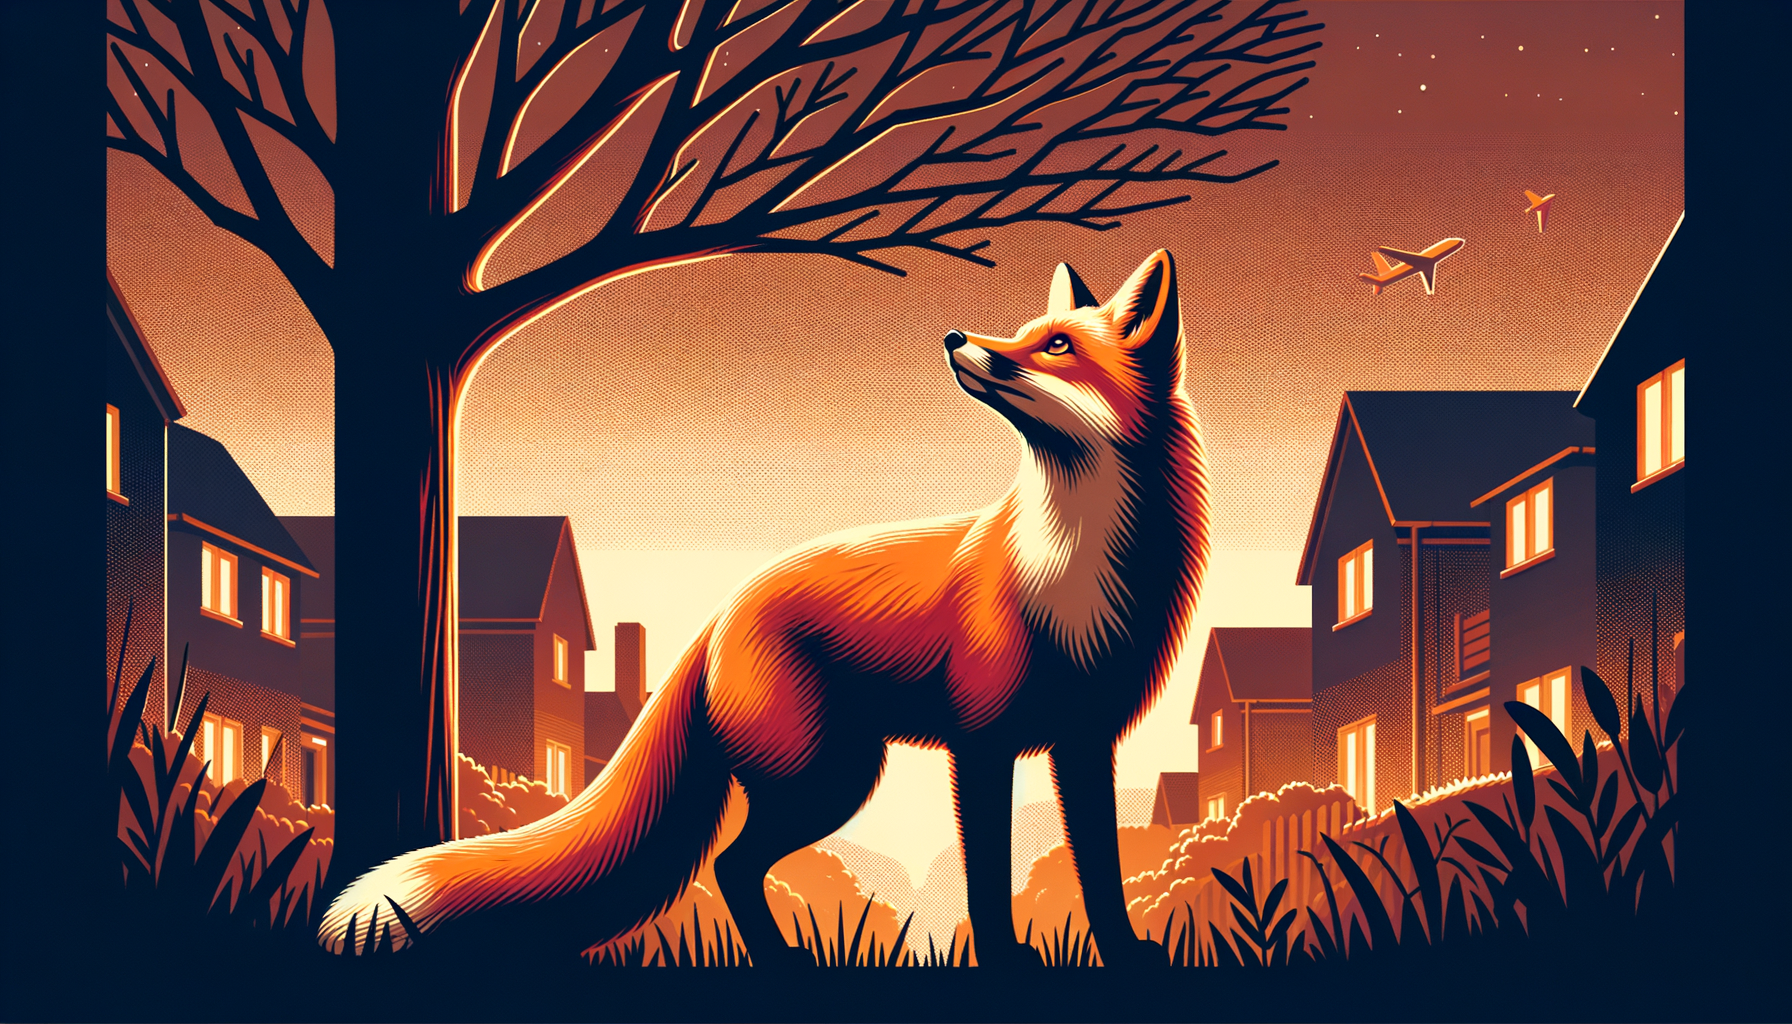 ALT: A red fox assessing a tree's climbability